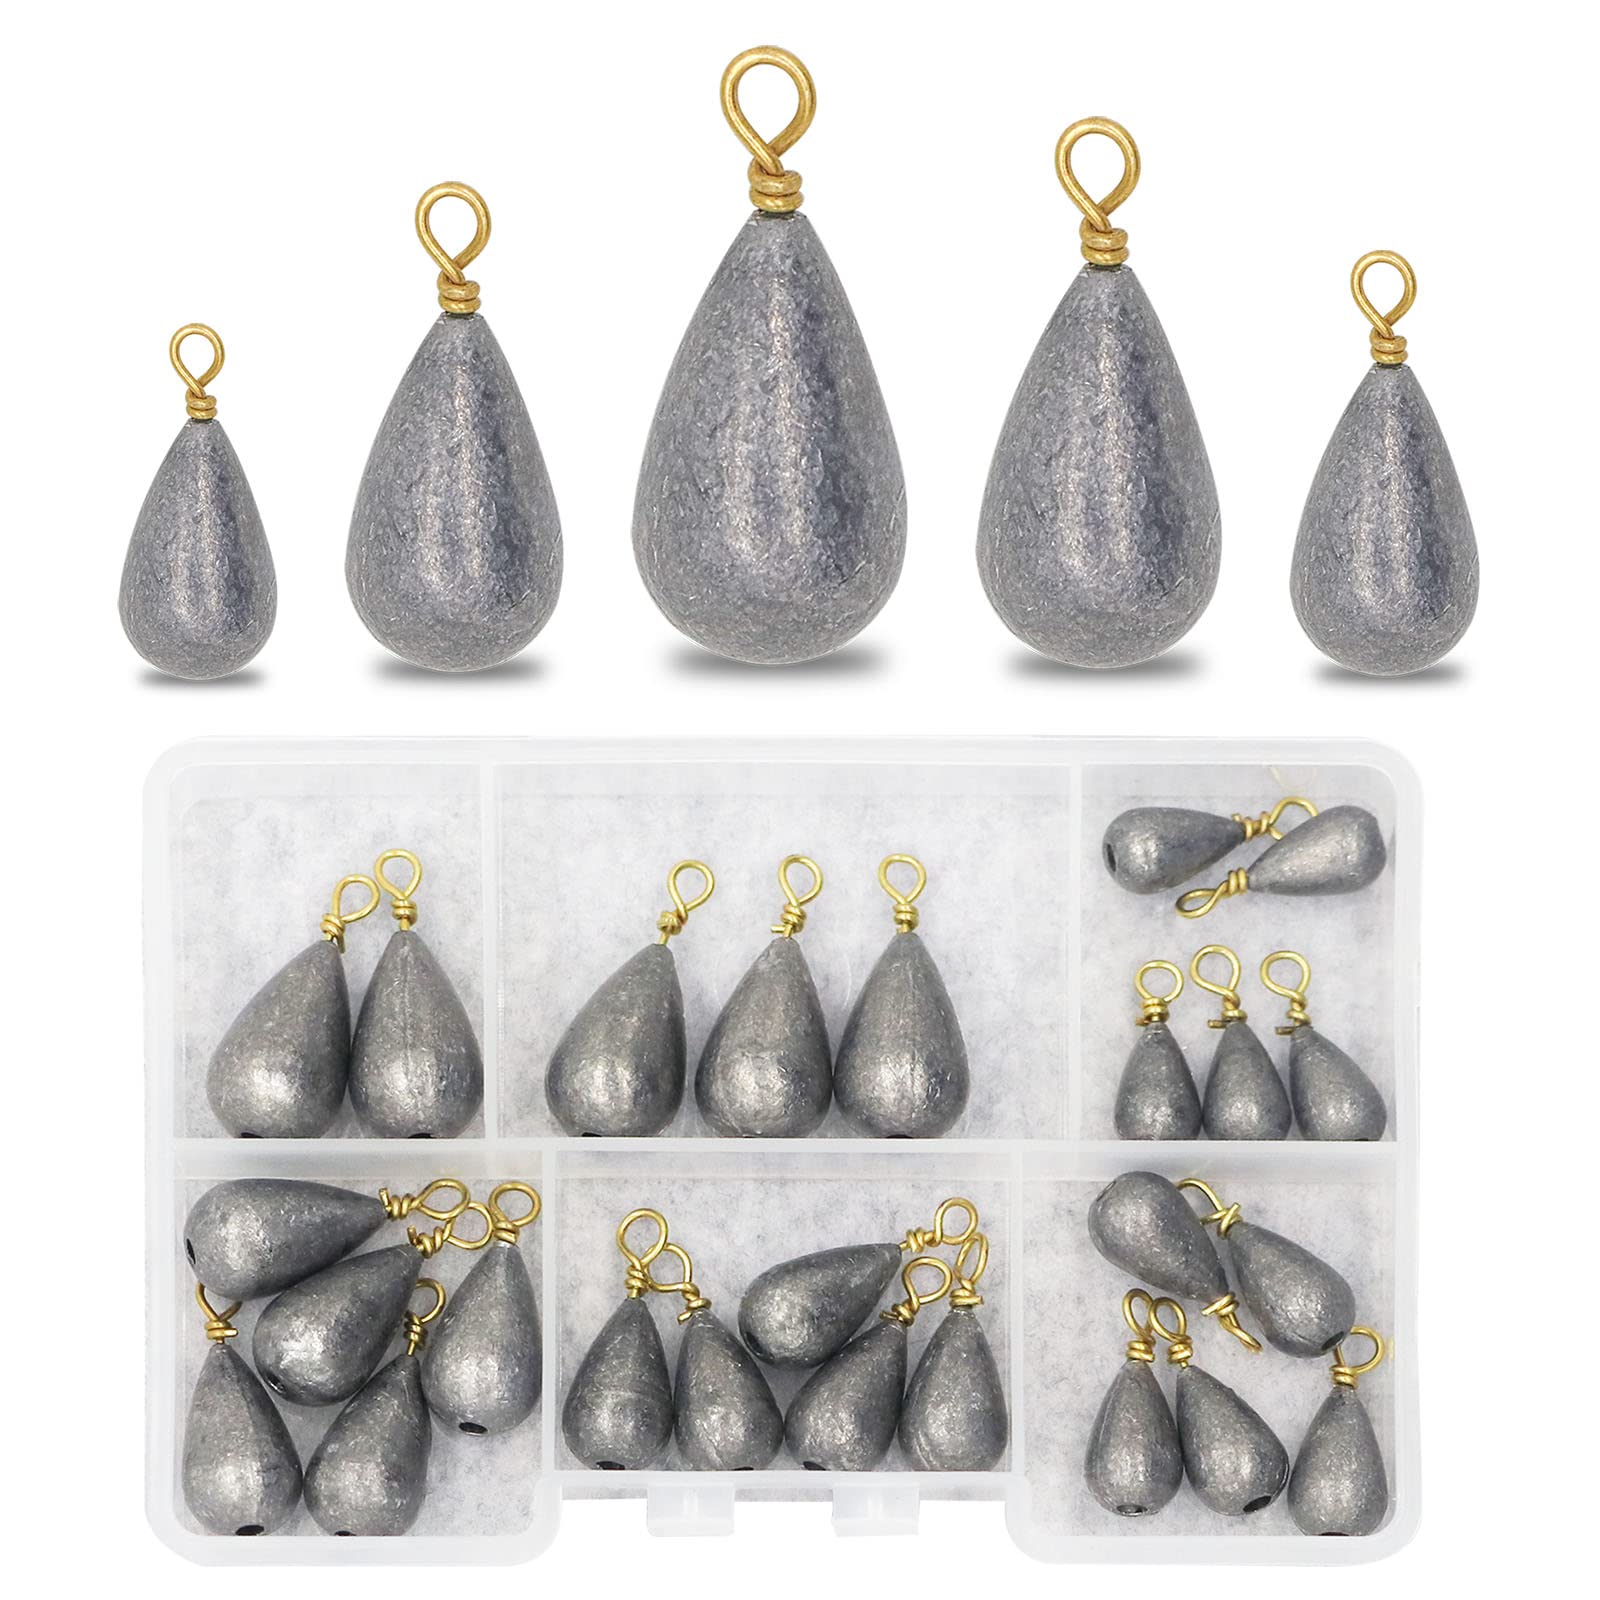 UperUper Fishing Weights Sinkers Kit, 25pcs/Box Assorted Bass Casting  Weights Bell Sinkers Catfish Weights Sinkers